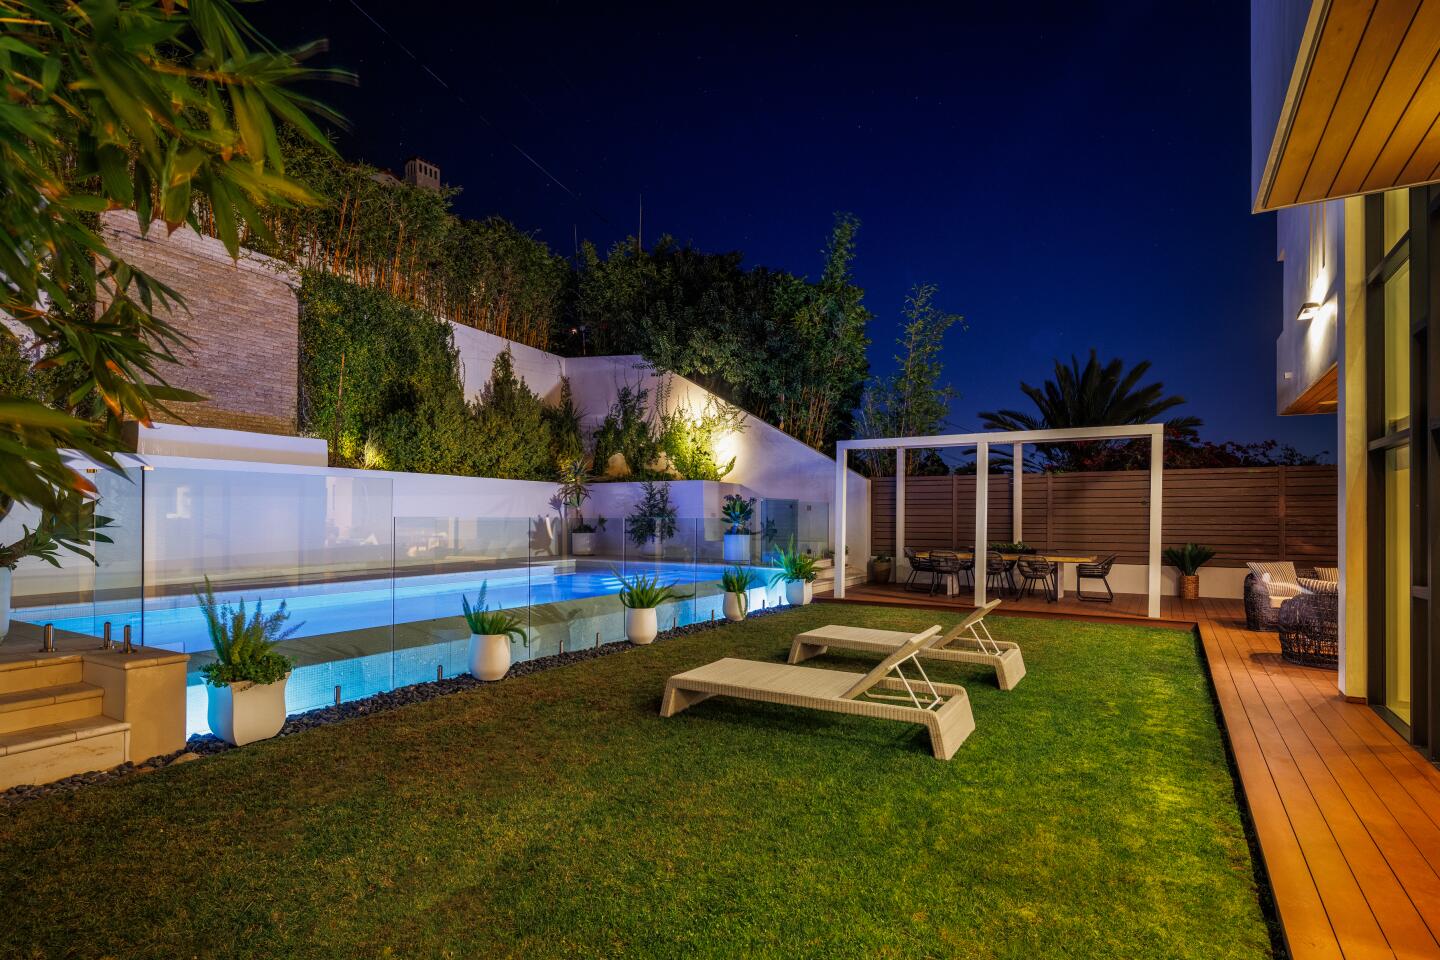 Lawn with furniture and foliage.